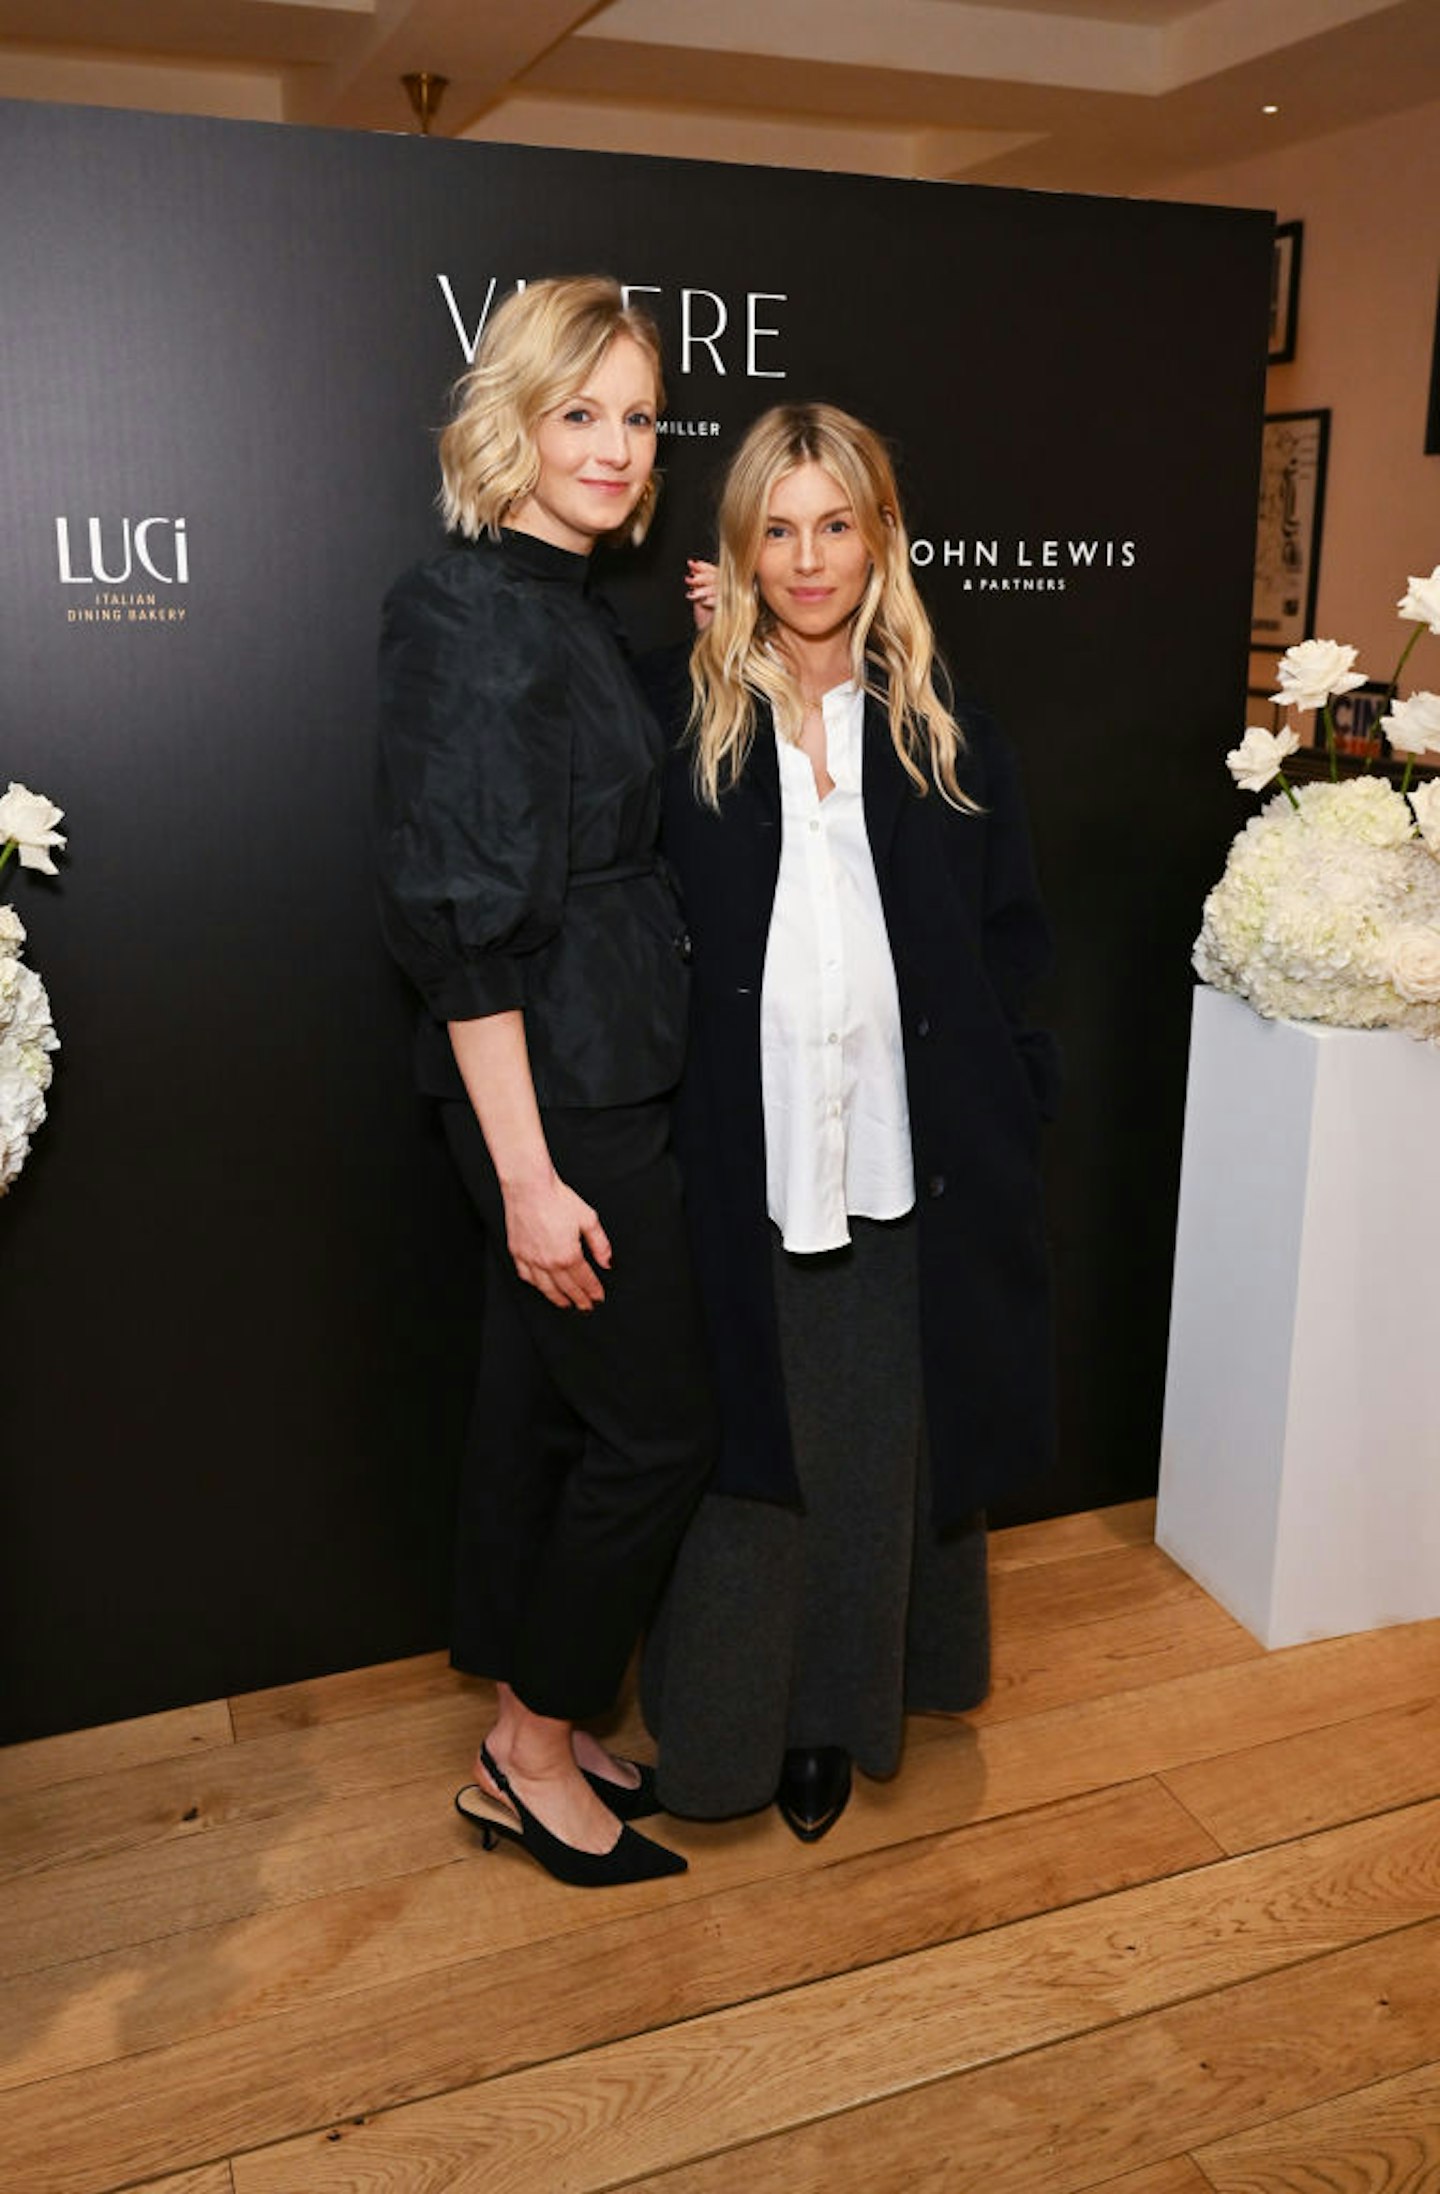 Savannah and Sienna Miller at the launch of Vivere in 2023